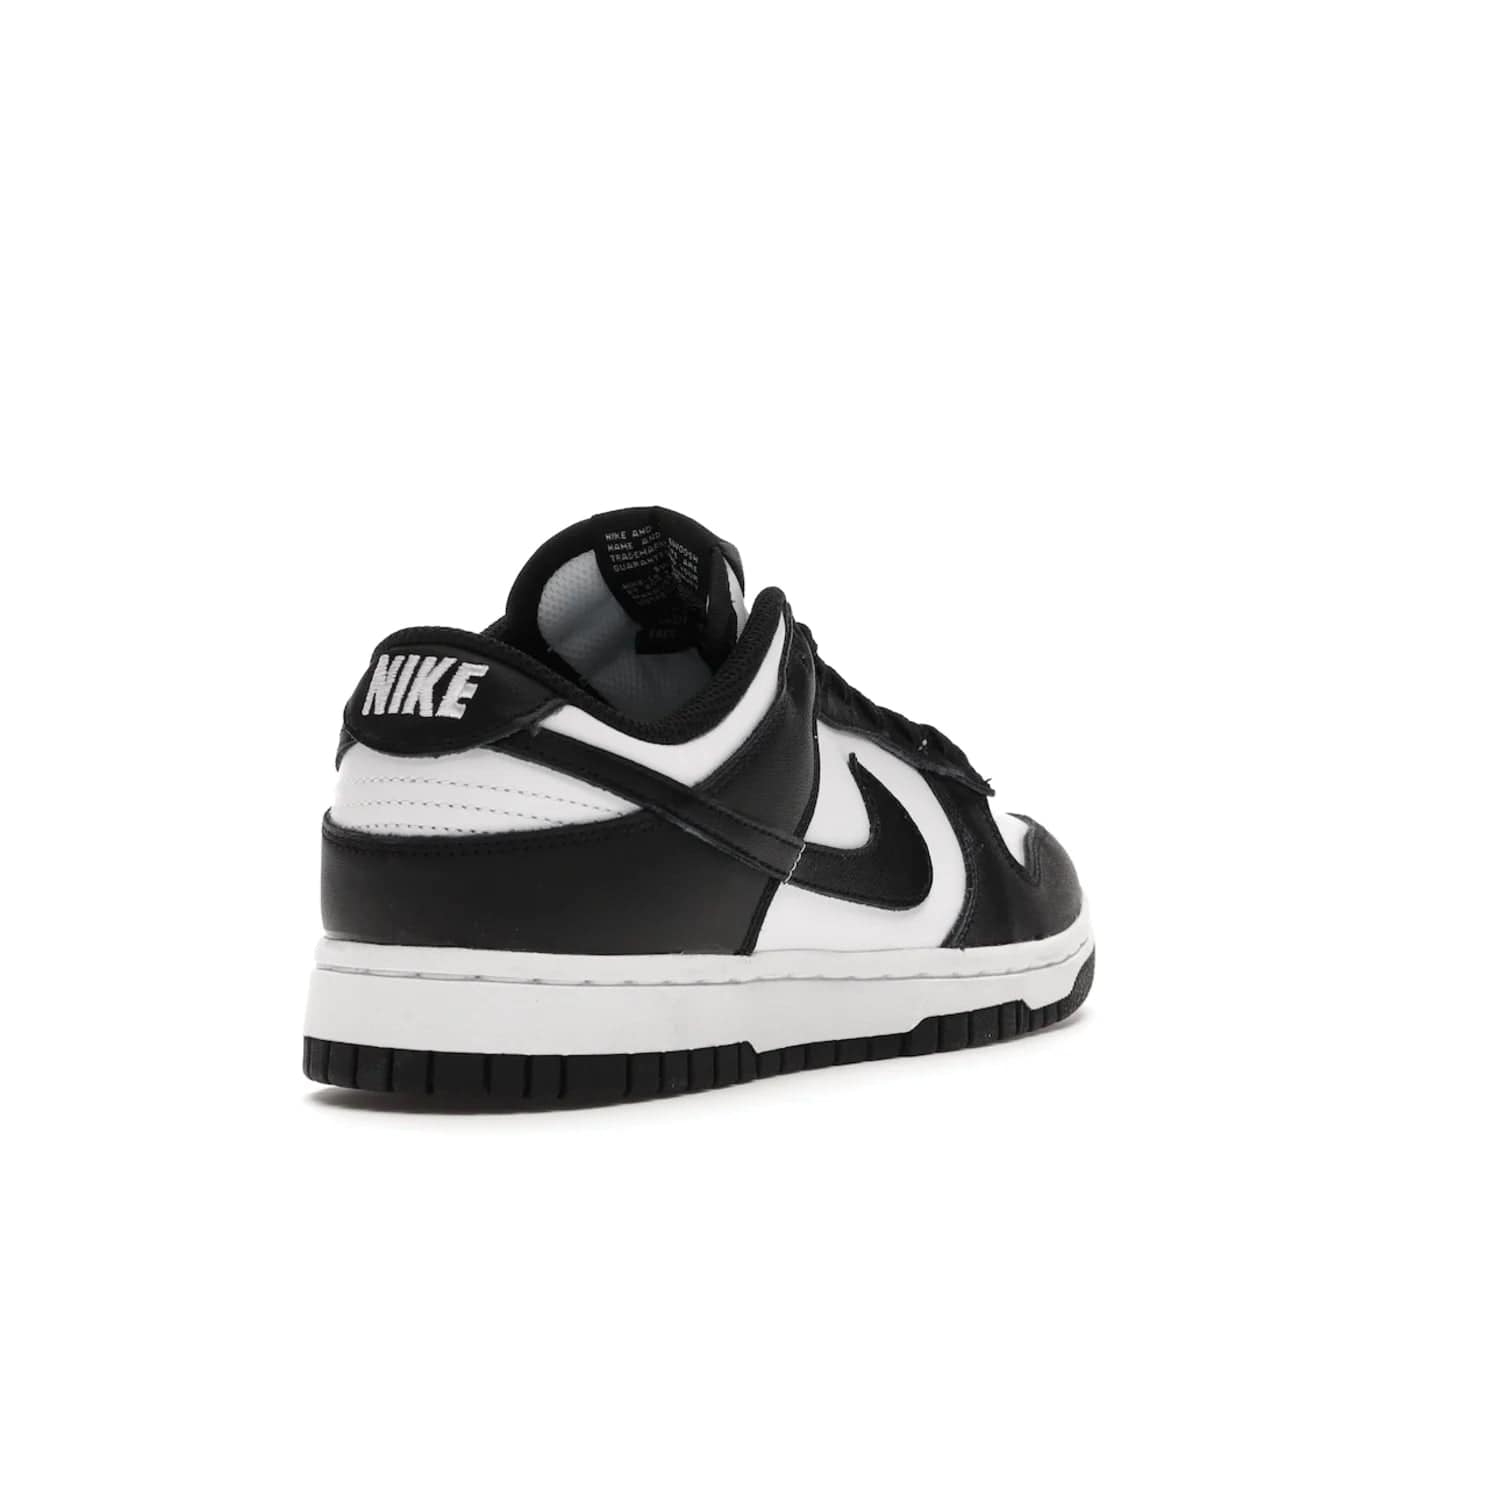 Nike Dunk Low Retro White Black Panda (2021) (Women's) - Image 31 - Only at www.BallersClubKickz.com - Say hello to the new Nike Dunk Low Retro White Black Panda (2021) (Women's)! White & black leather upper with Nike Swoosh logo. Get your pair for $100 in March 2021! Shop now!